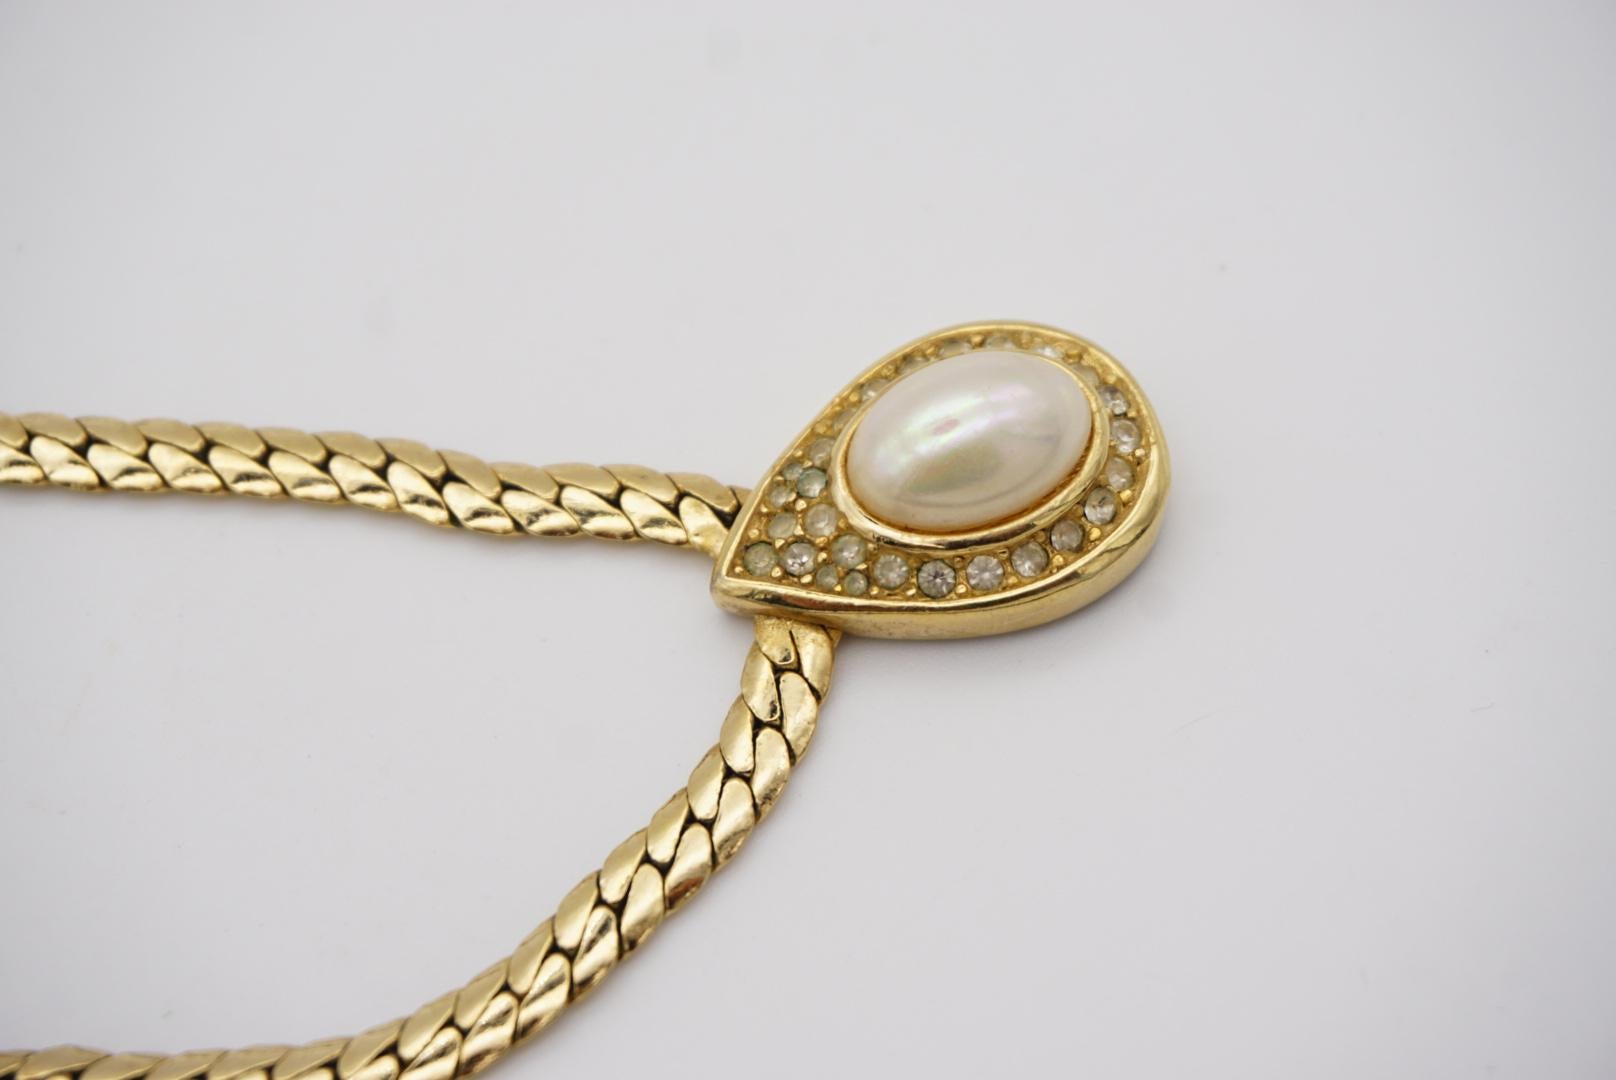 Christian Dior Vintage 1970s Large Oval Pearl Crystals Tear Water Drop Necklace For Sale 2